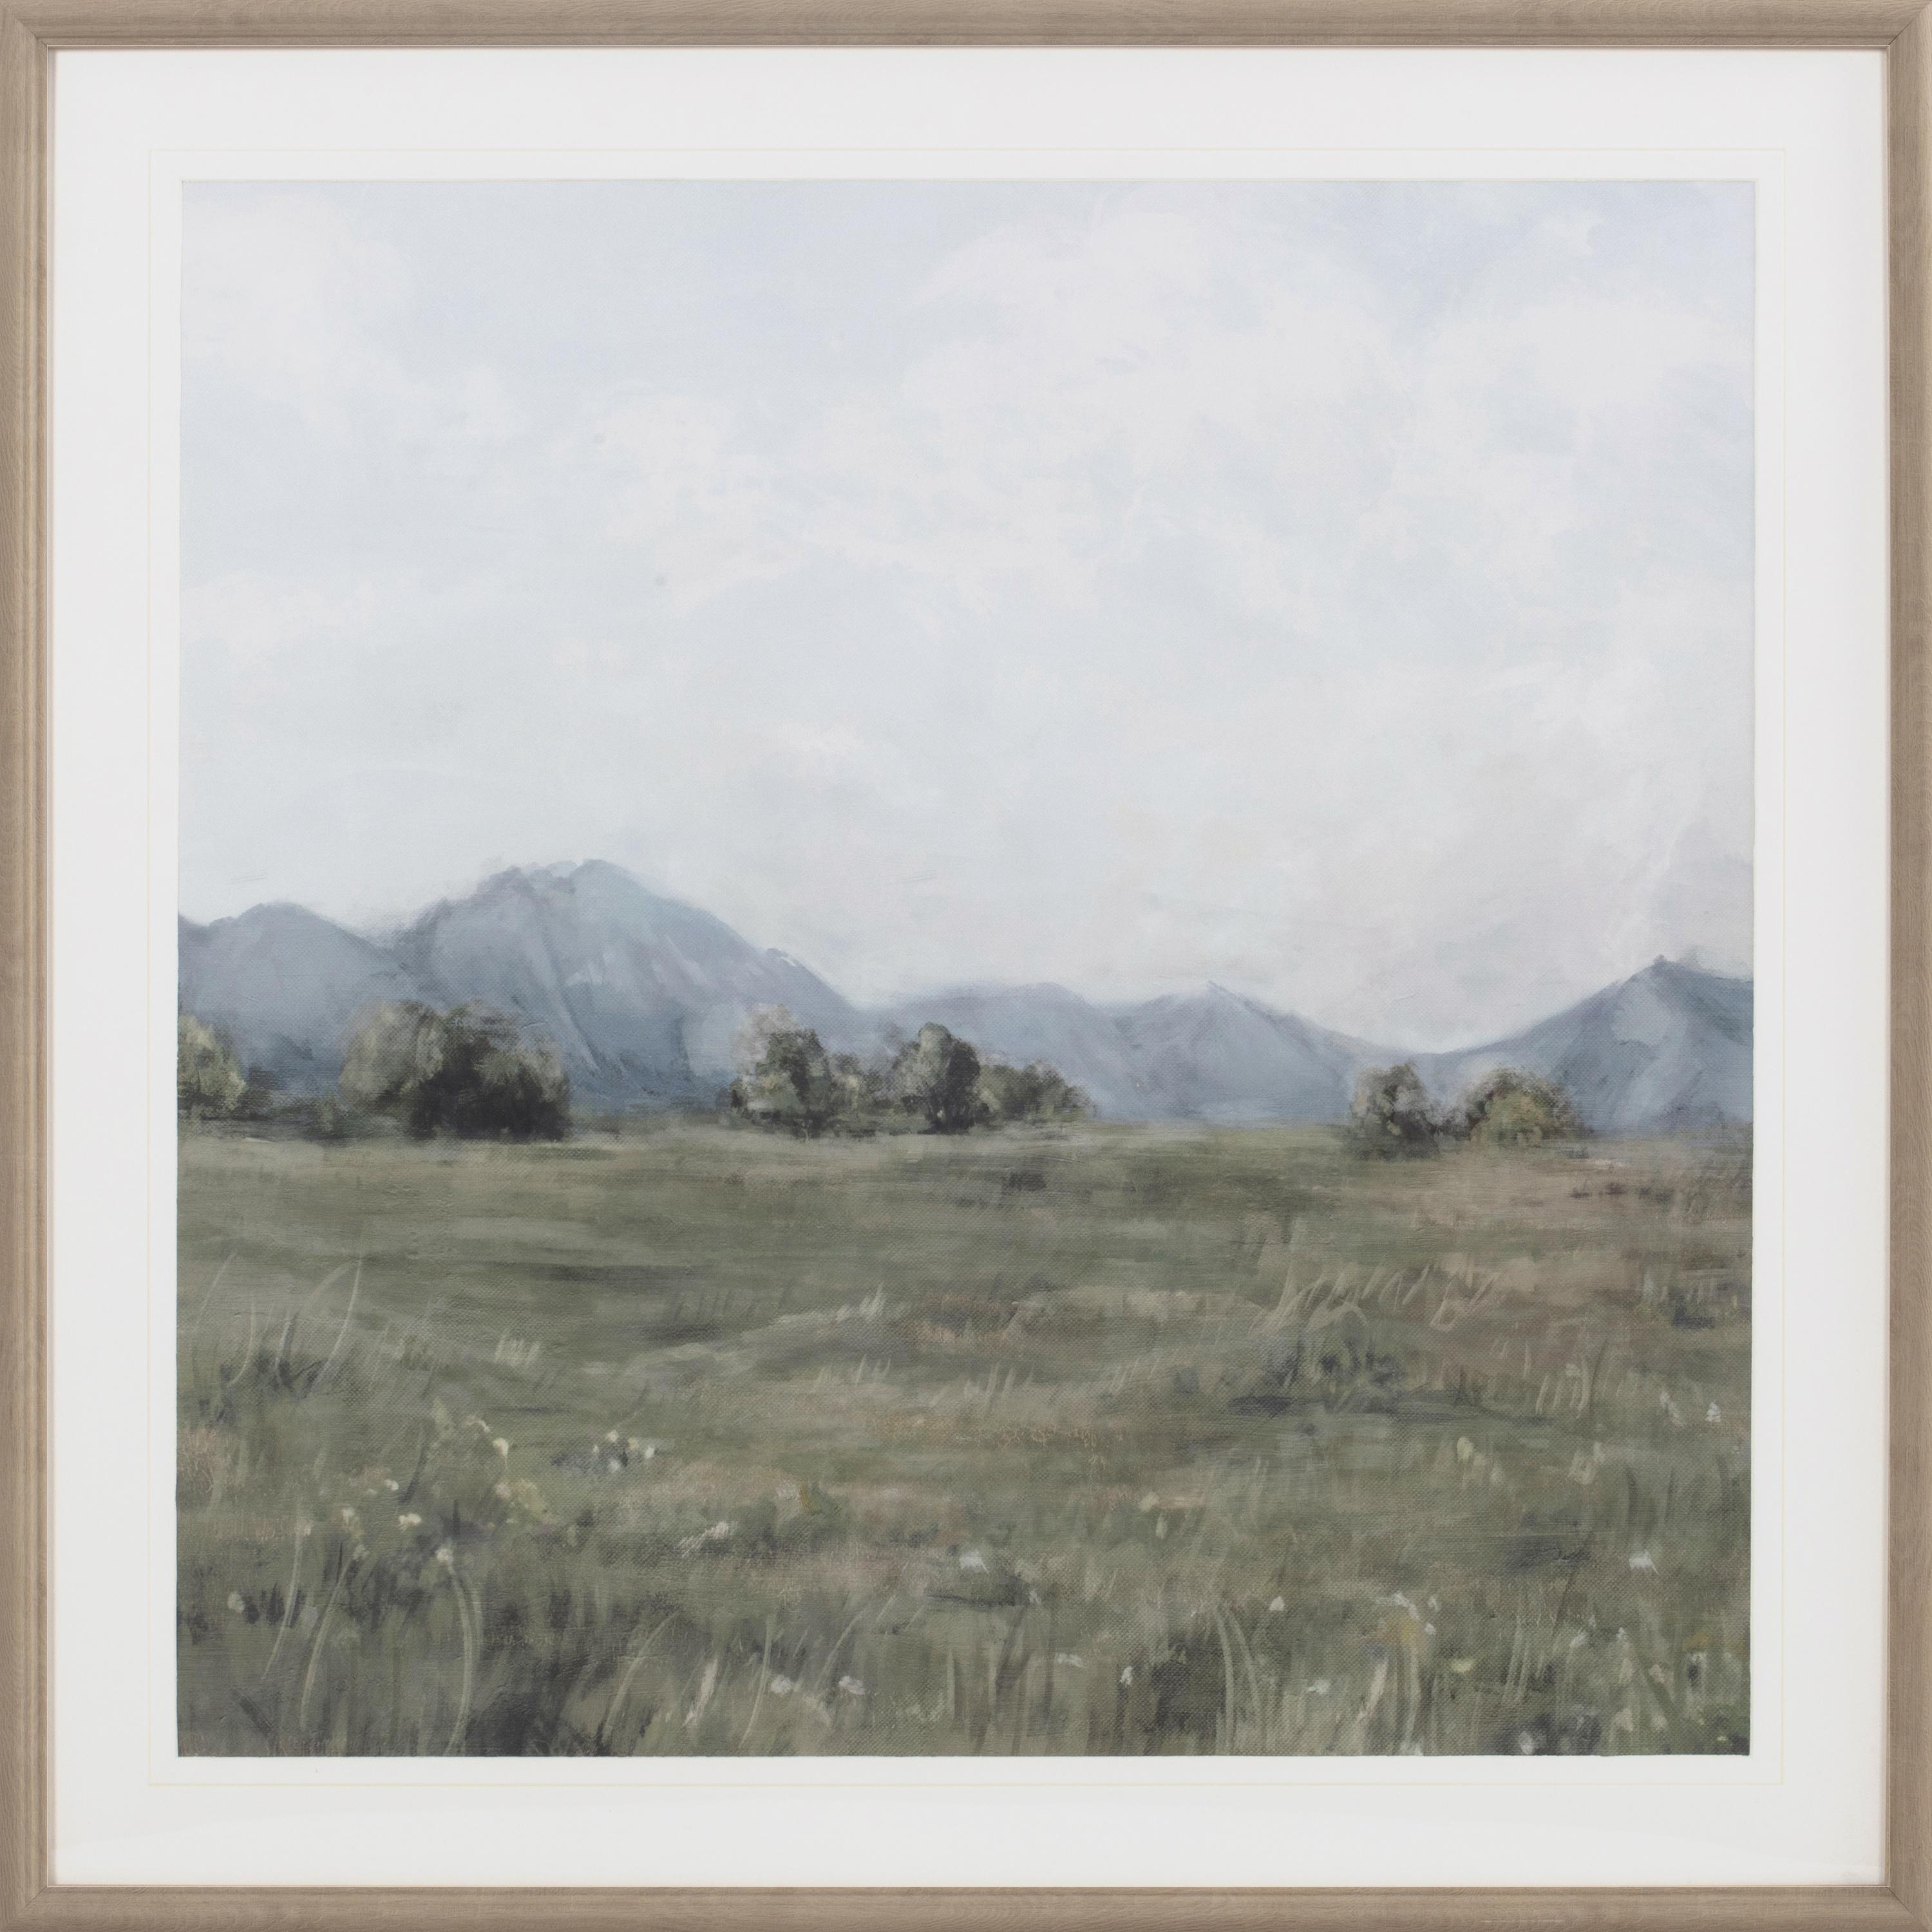 My Texas House Meadow Day Landscape Framed Under Glass Art 30" x 30" - image 1 of 5